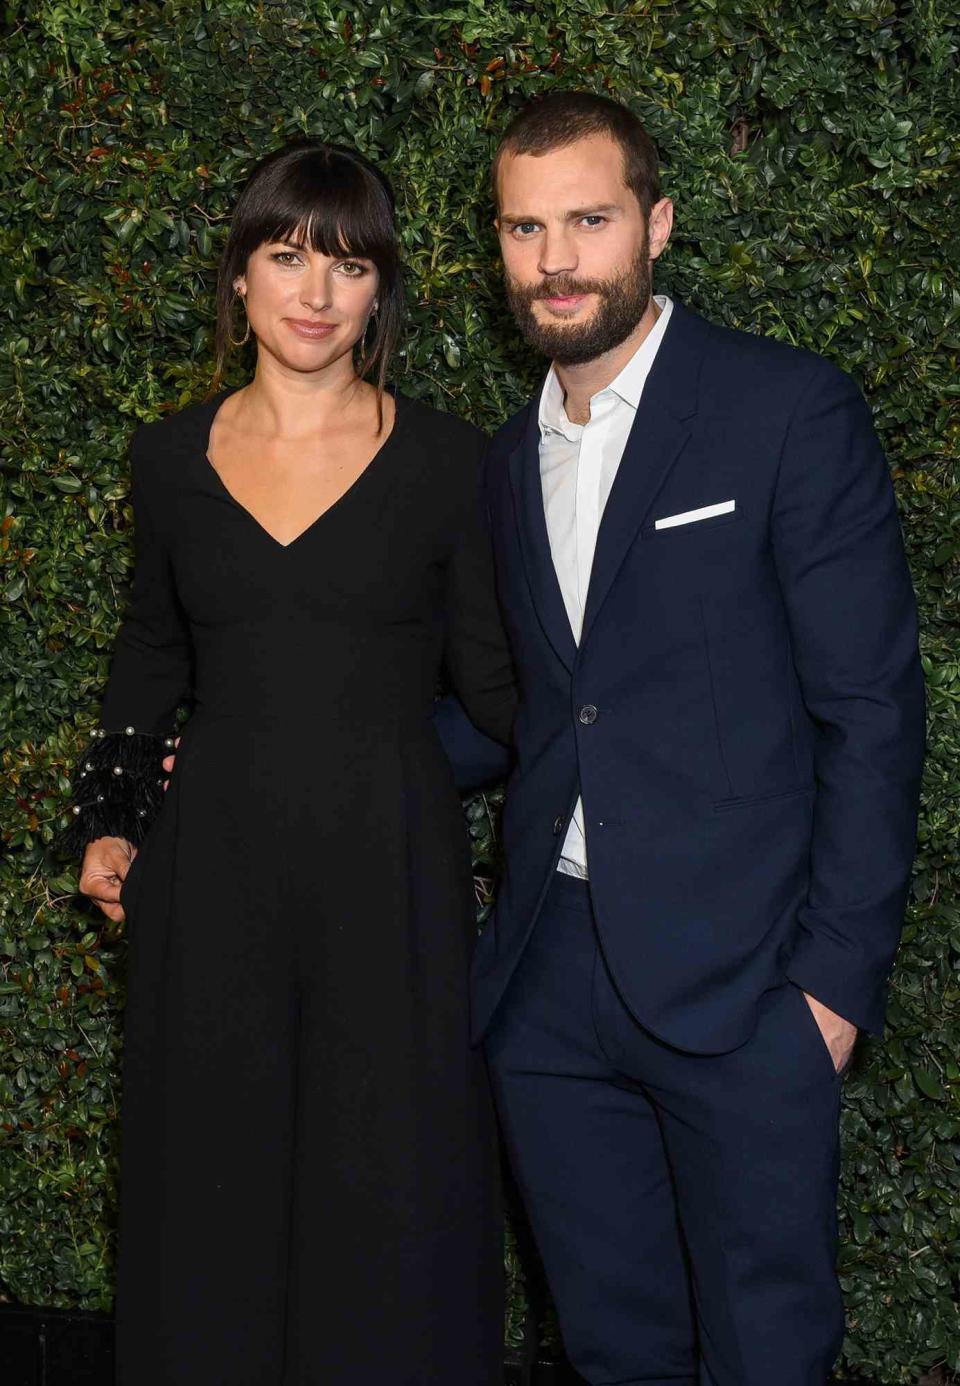 Jamie Dornan and Amelia Warner attend Charles Finch and CHANEL Pre-Oscar Awards Dinner at Madeo Restaurant on February 25, 2017 in Los Angeles, California